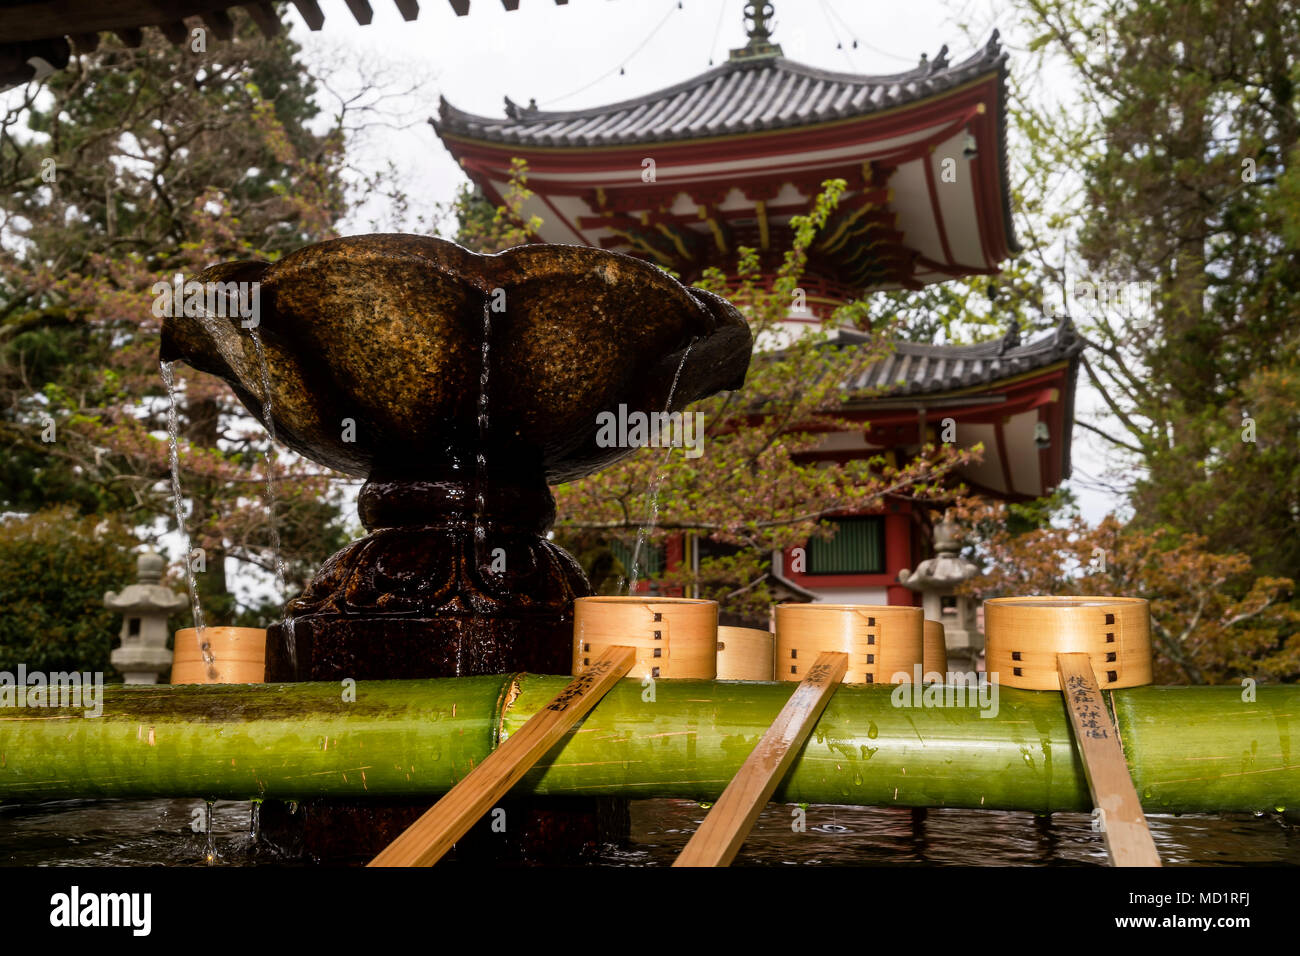 Lotus shaped purification basin and ladles on a bamboo fountain inside the Chion-in Temple of Kyoto, Japan Stock Photo